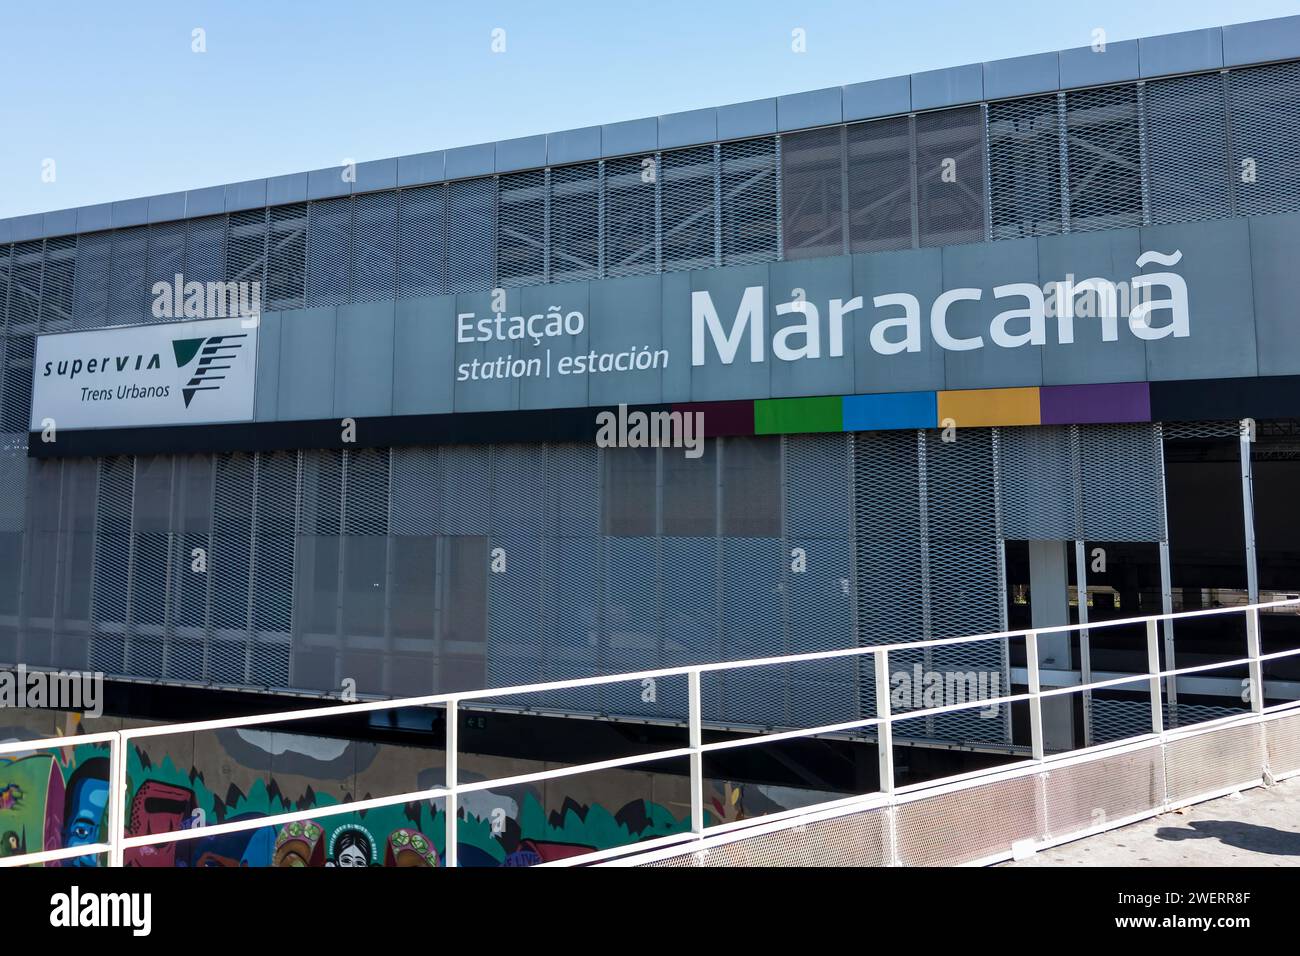 Partial view of Maracana station metal facade as saw from the station's exit pedestrian bridge in Maracana district under summer morning blue sky. Stock Photo